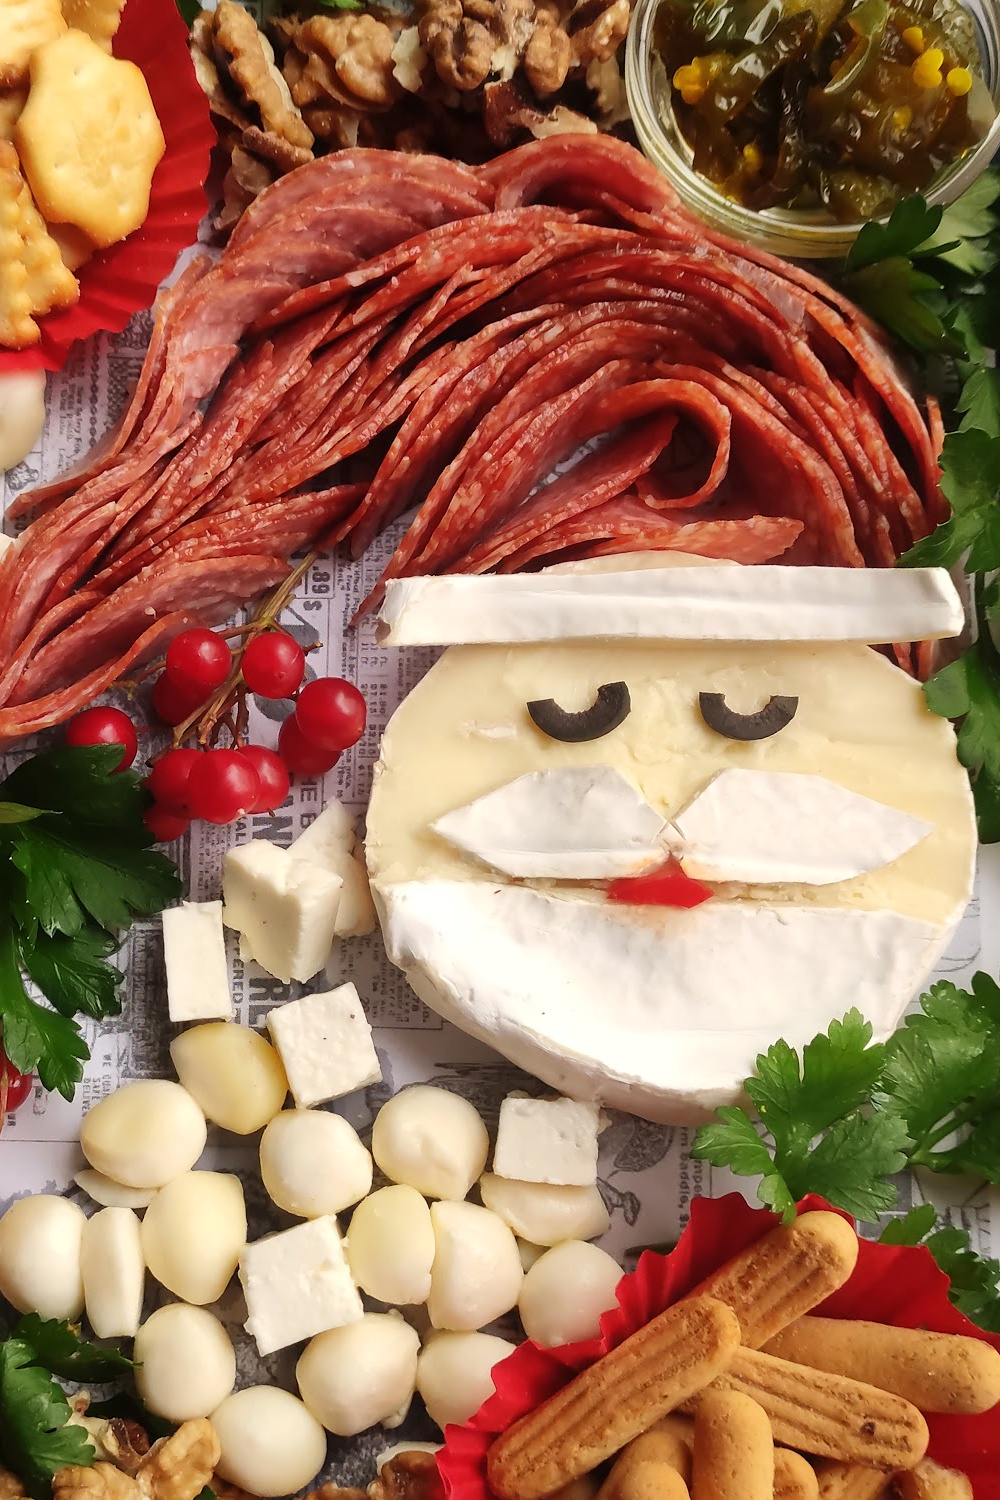 Santa Charcuterie Board. Santa is made out of brie cheese with a salami Santa hat. The Santa cheese is surrounded by other cheeses, crackers, dried fruit and nuts.